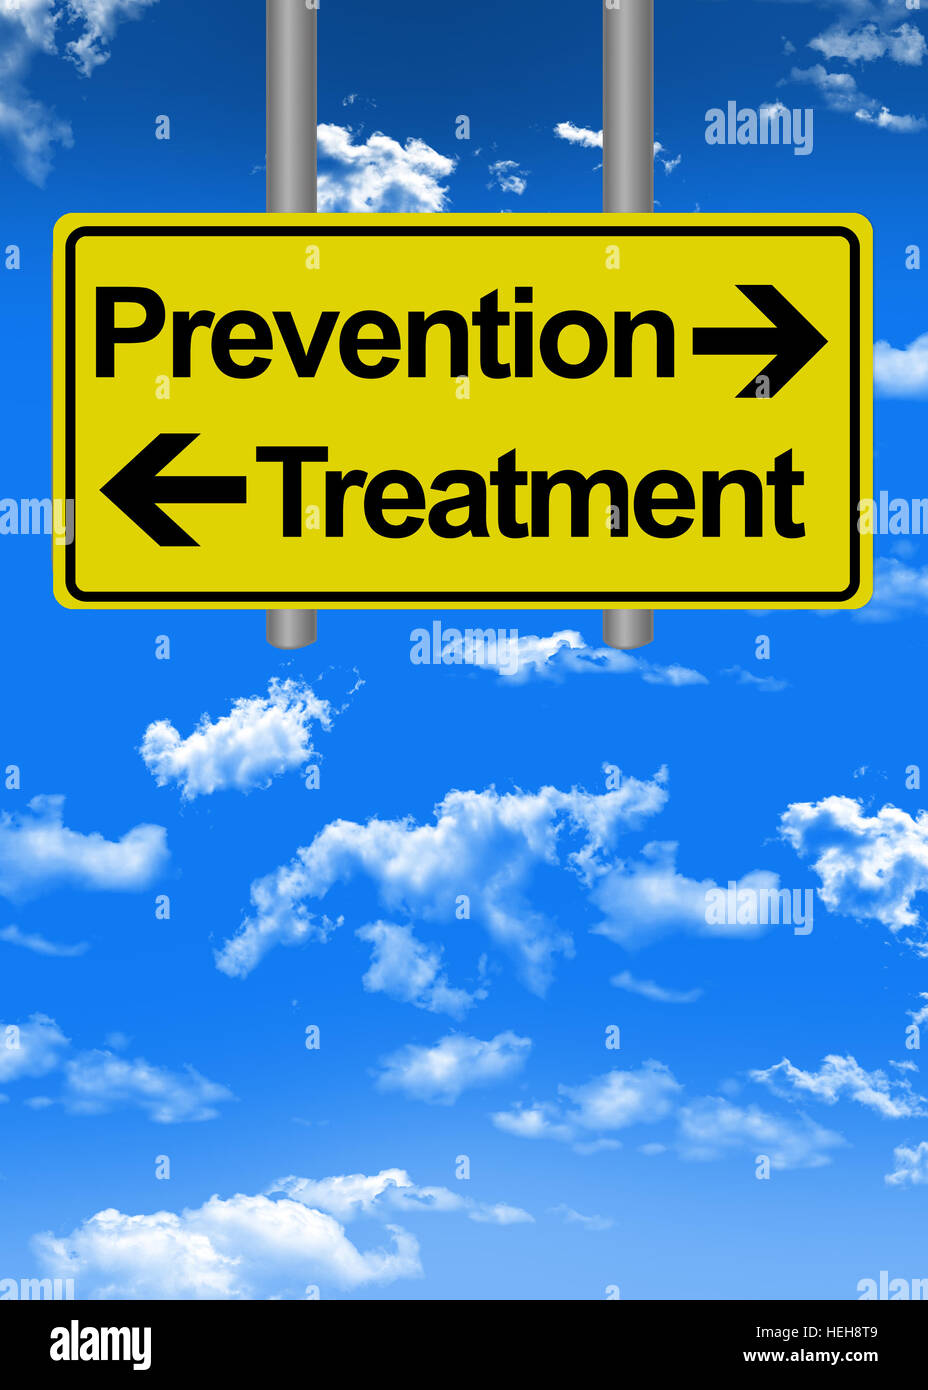 Prevention versus treatment on road sign Stock Photo